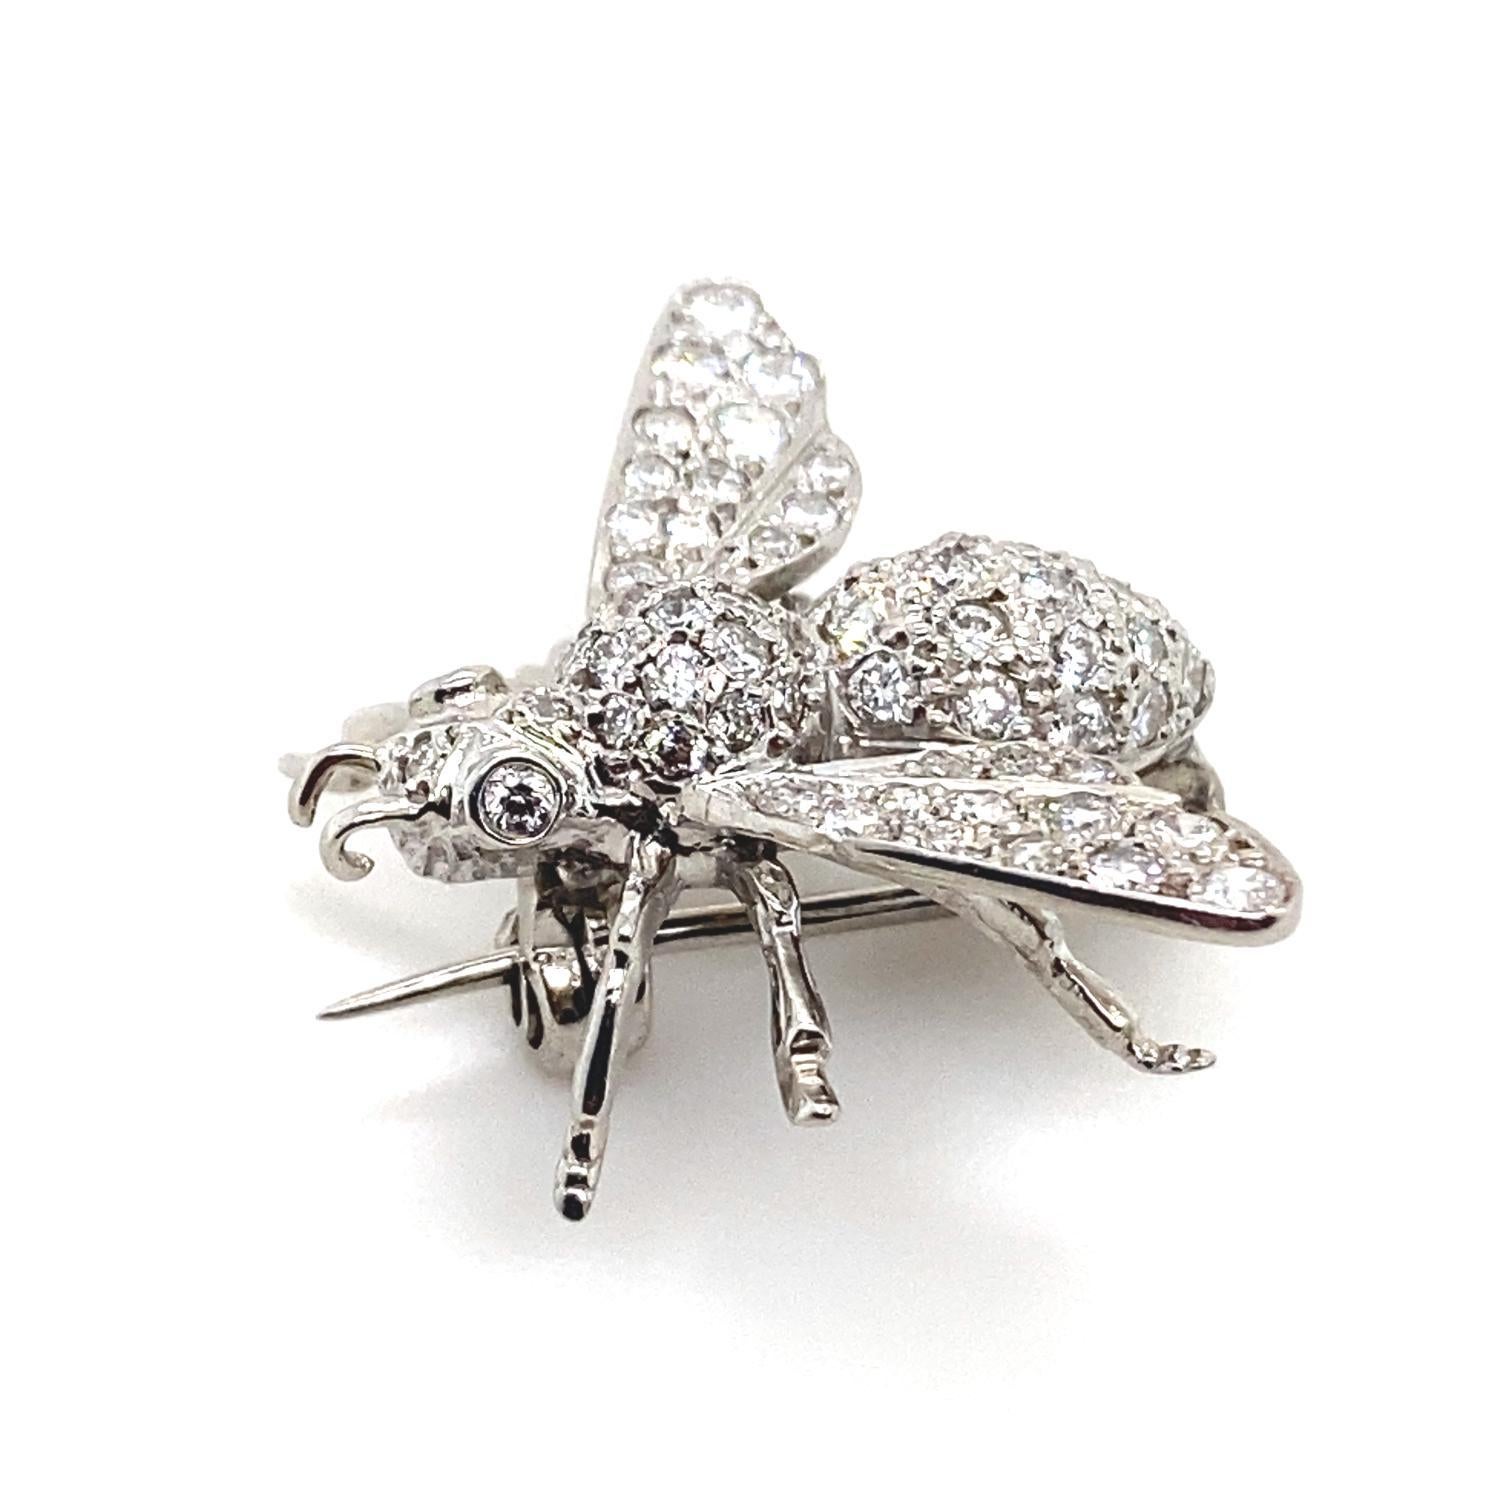 A diamond bee brooch pin set in 18 karat white gold.

This sweet and realistically detailed brooch is set to its head with two pinkish tinted round brilliant cut diamond for eyes. The thorax, abdomen and wings of the bee comprise of intricately